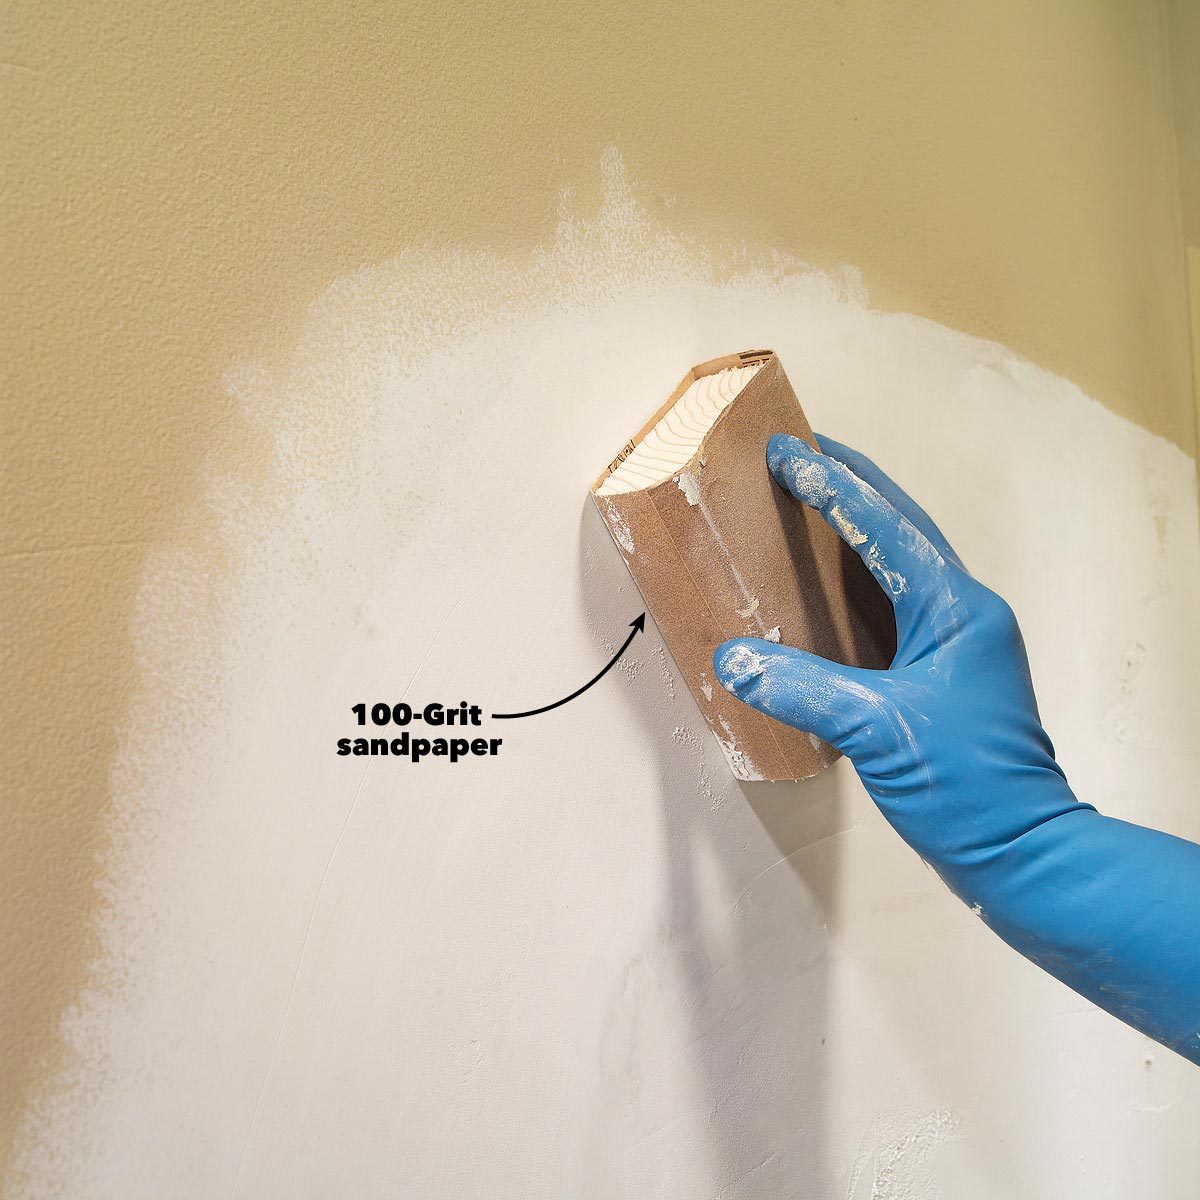 Drywall Repair: How to Patch a Hole in the Wall - How To Fix A Small Hole In A Wall